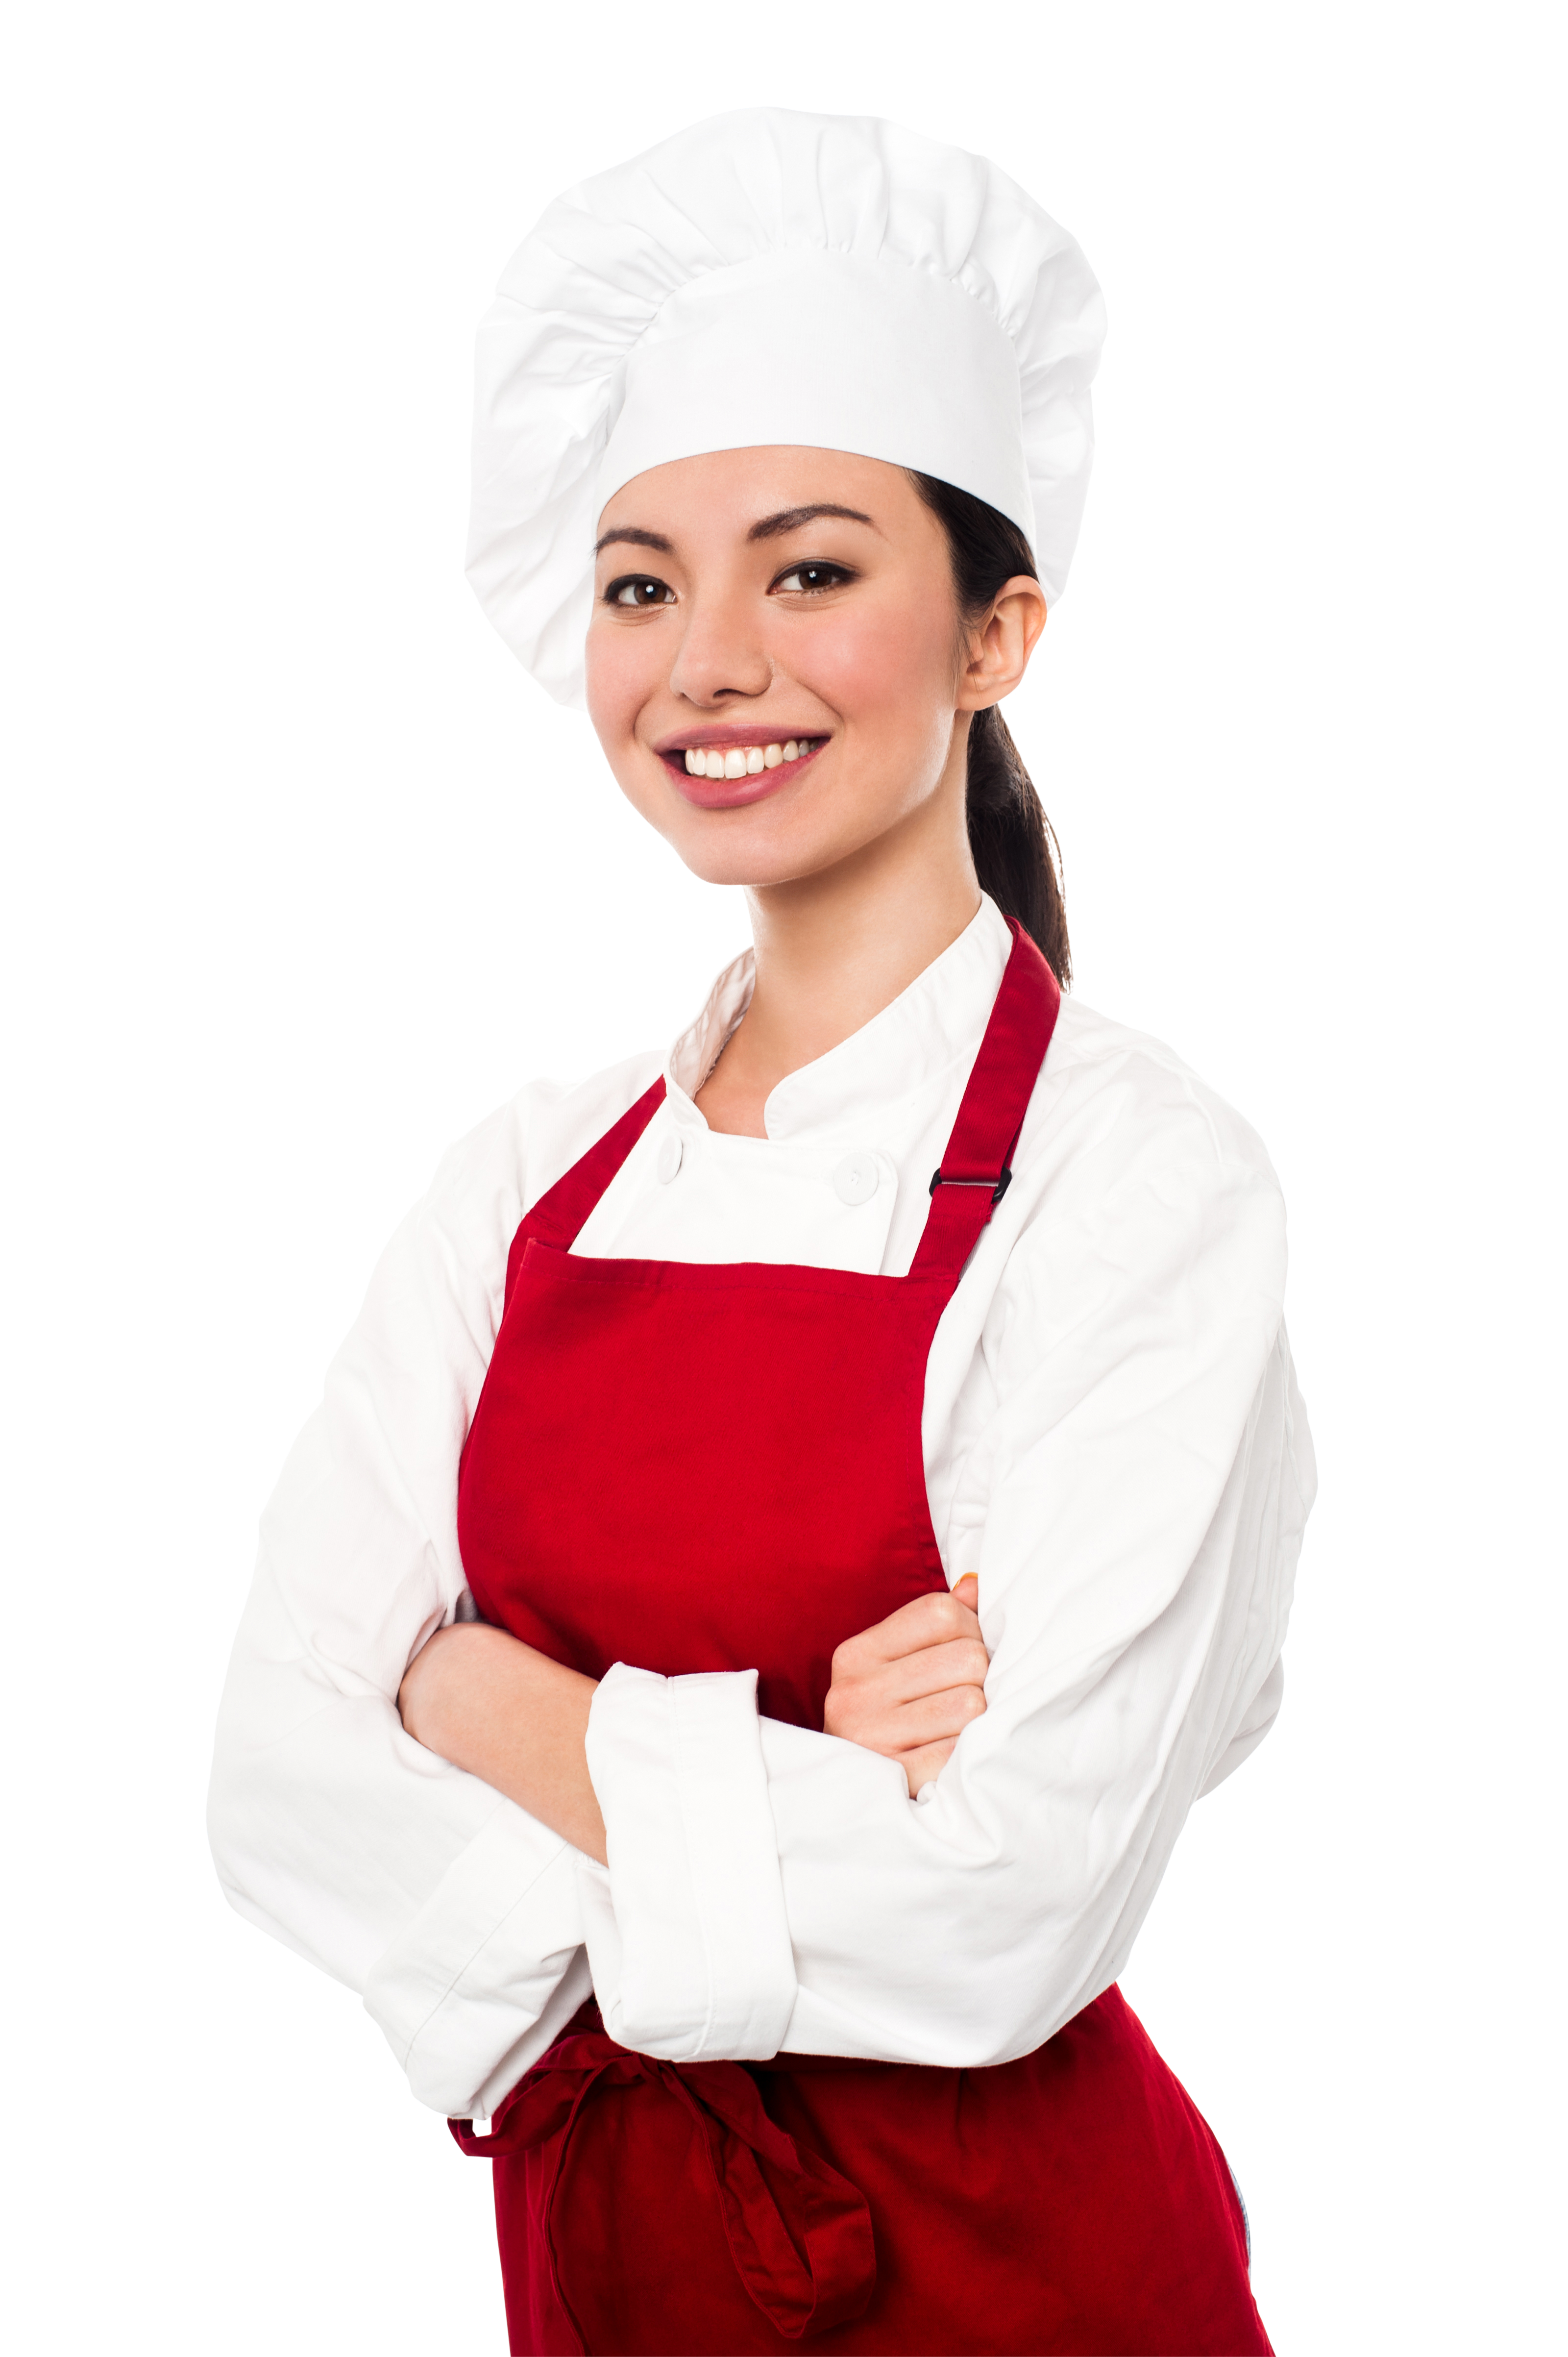 cooking clipart female chef